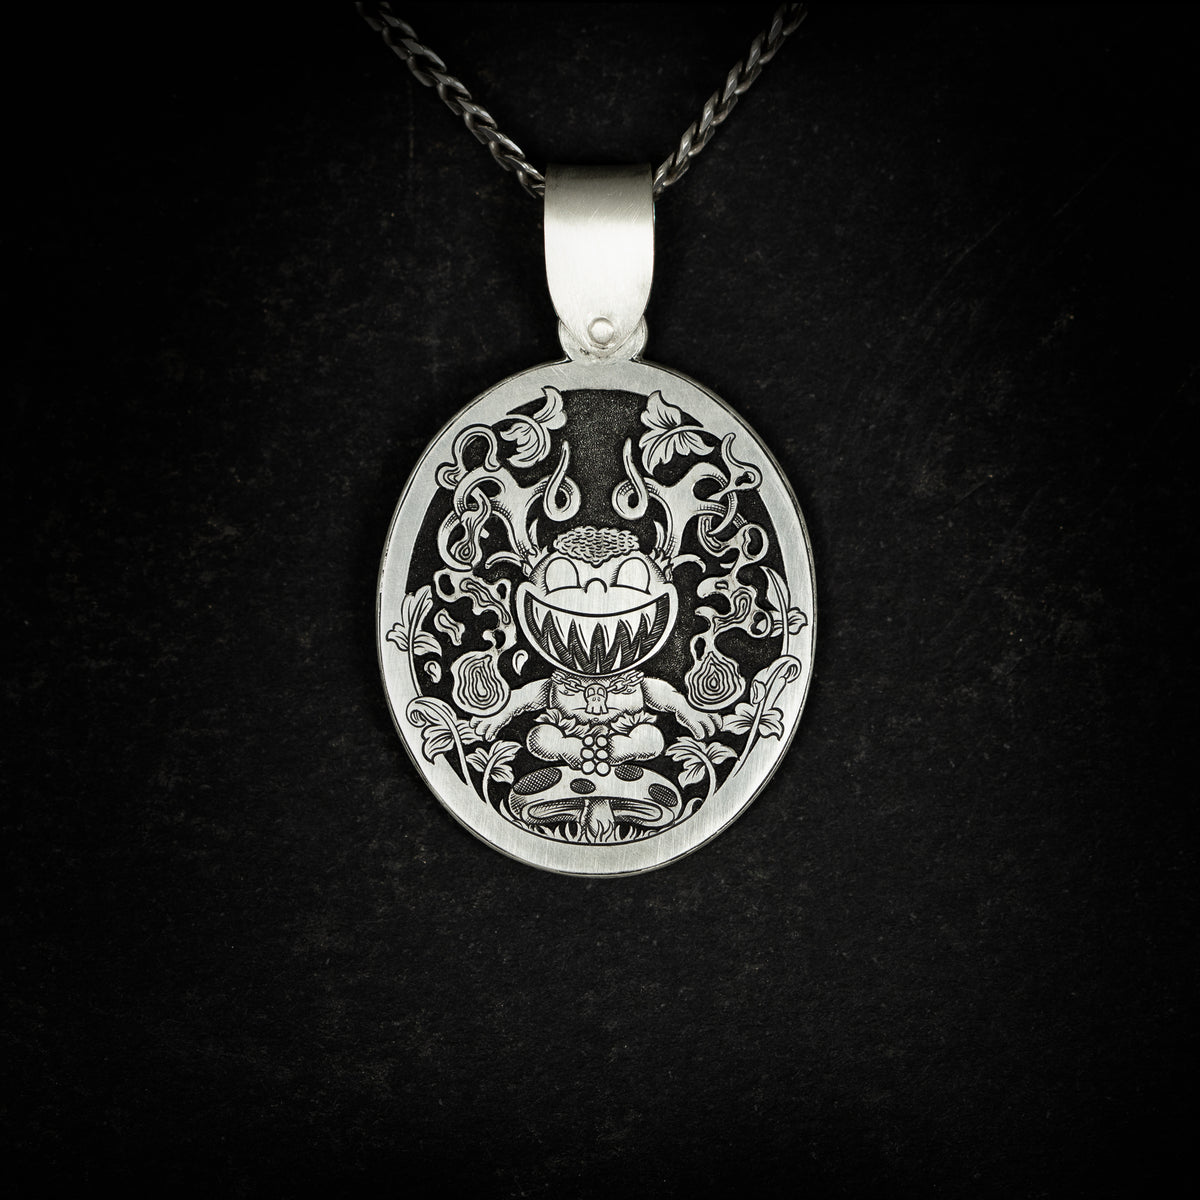 Hand engraved silver jewellery pendant featuring a fantasy cartoon style engraving with a child like creature with antlers, sitting on a mushroom wielding magic. On black background